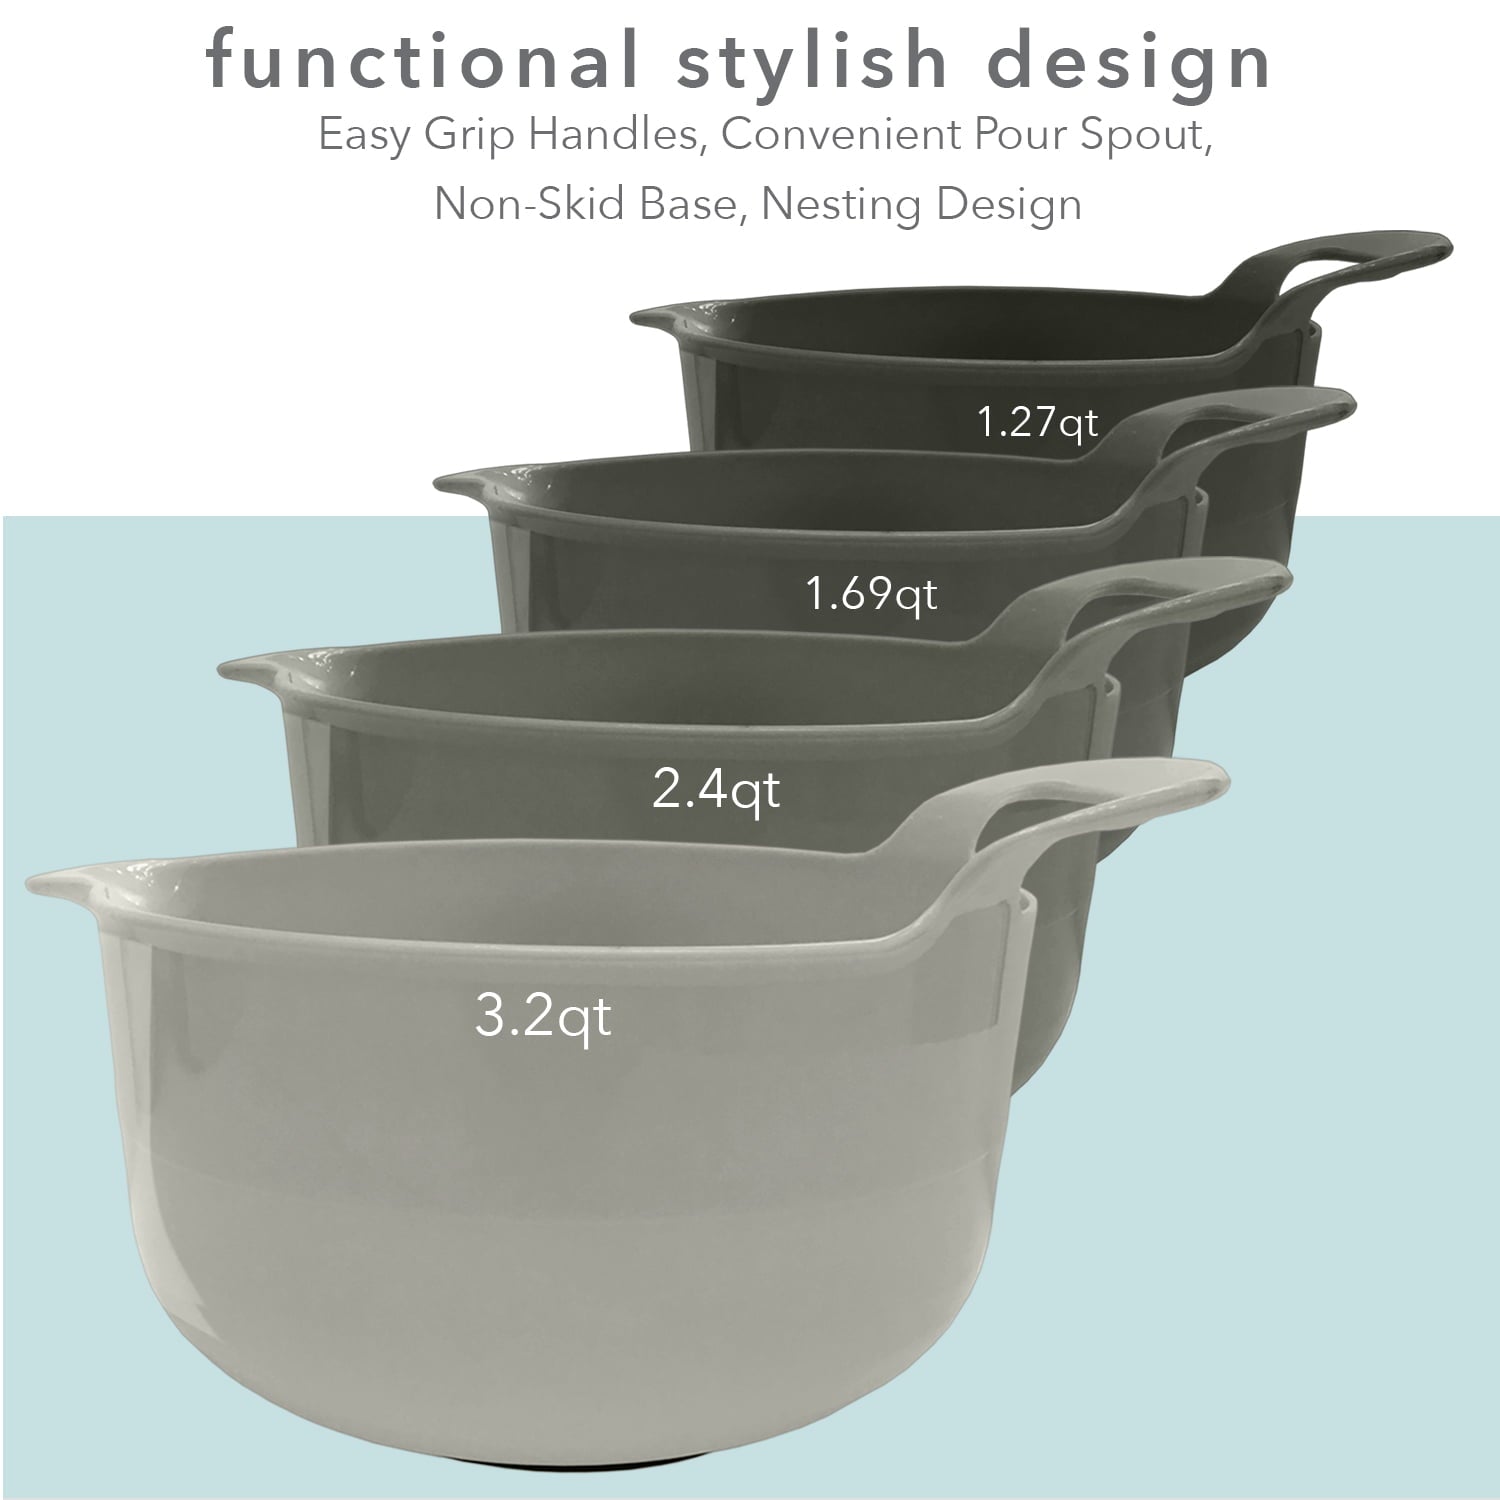 Edge Mixing Bowls 4 Piece Plastic Non-Skid Nesting Bowls with Spouts and Handles, Charcoal